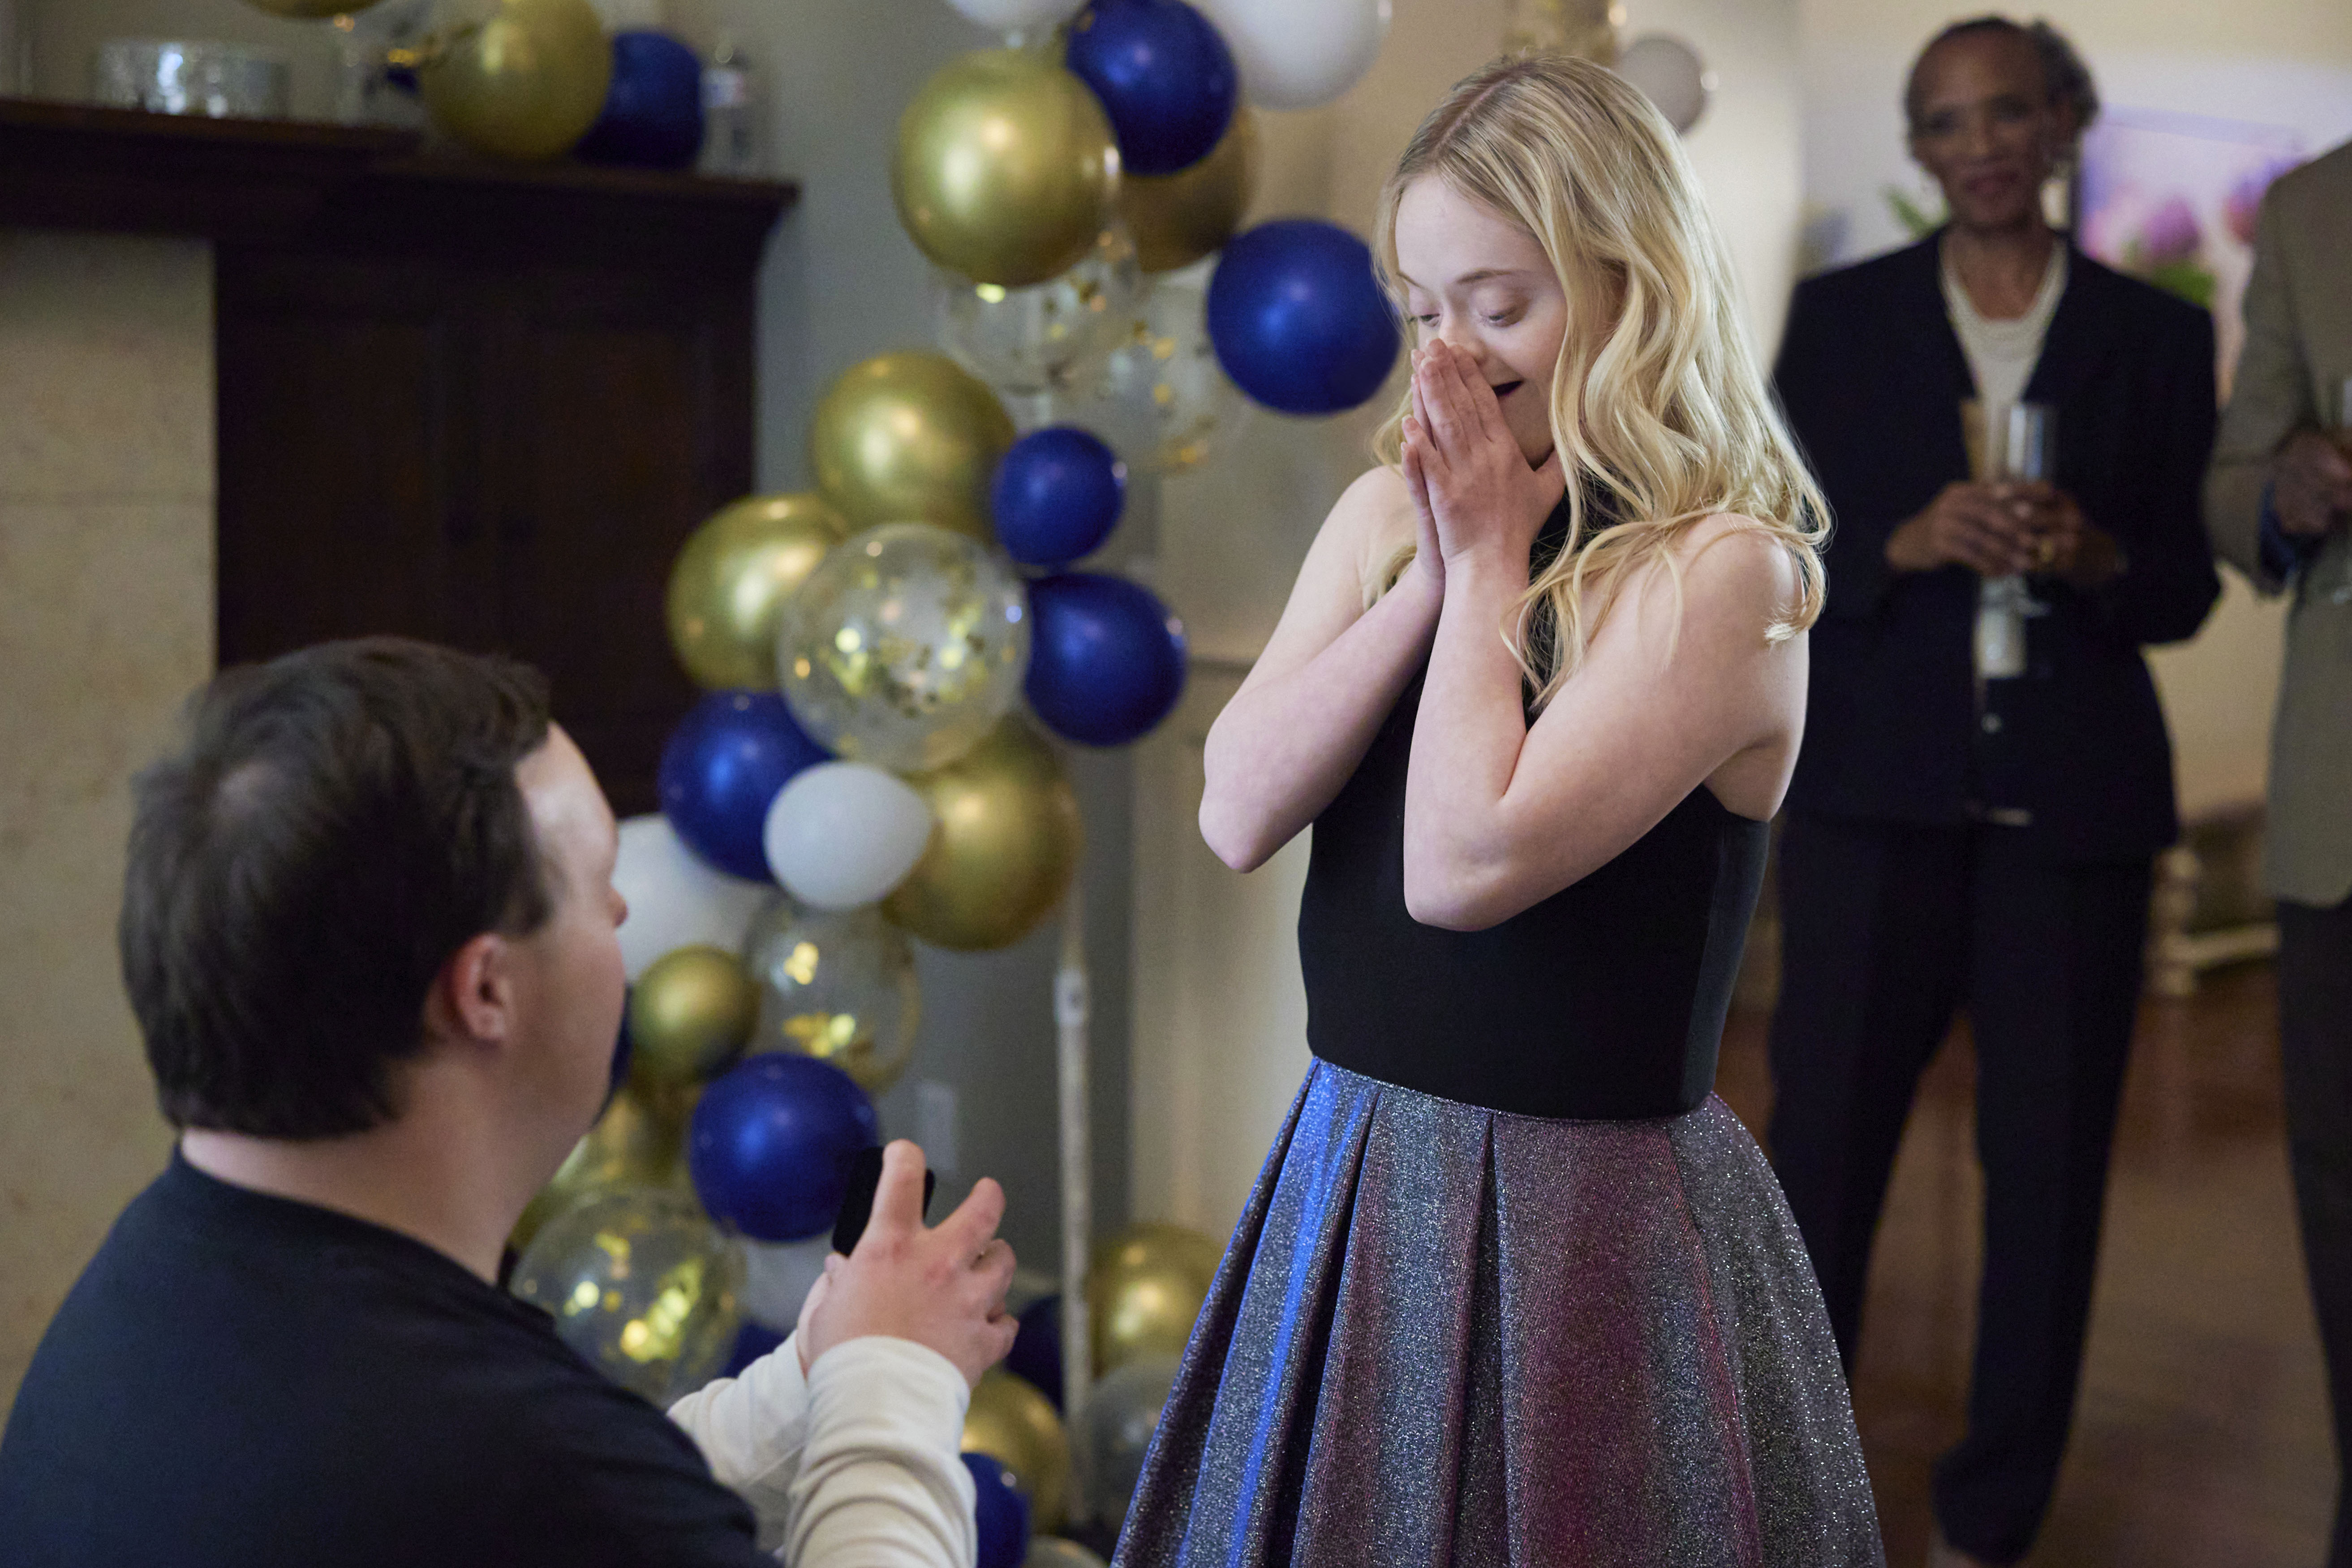 Man proposes to blonde woman in the Hallmark movie 'Color My World With Love'